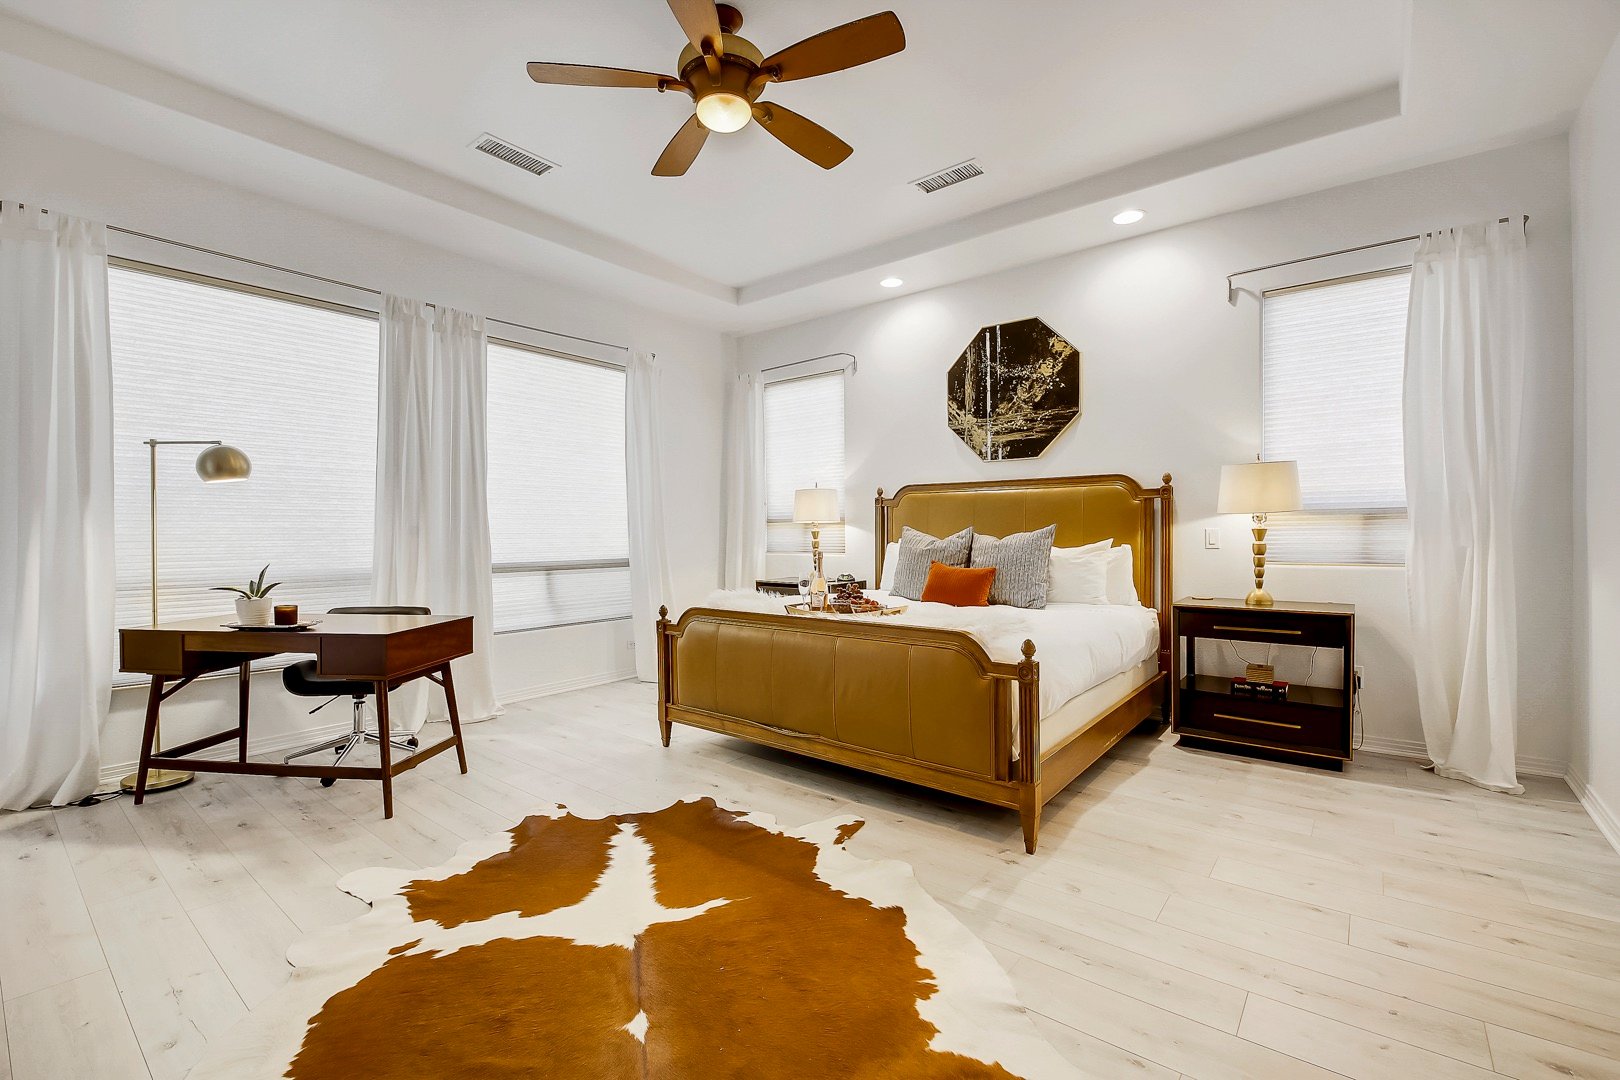 Master Suite 1 is located next to Suite 2 and features a King-sized Bed, HD television, switch-controlled ceiling fan, and large walk-in closet with access to the back patio.